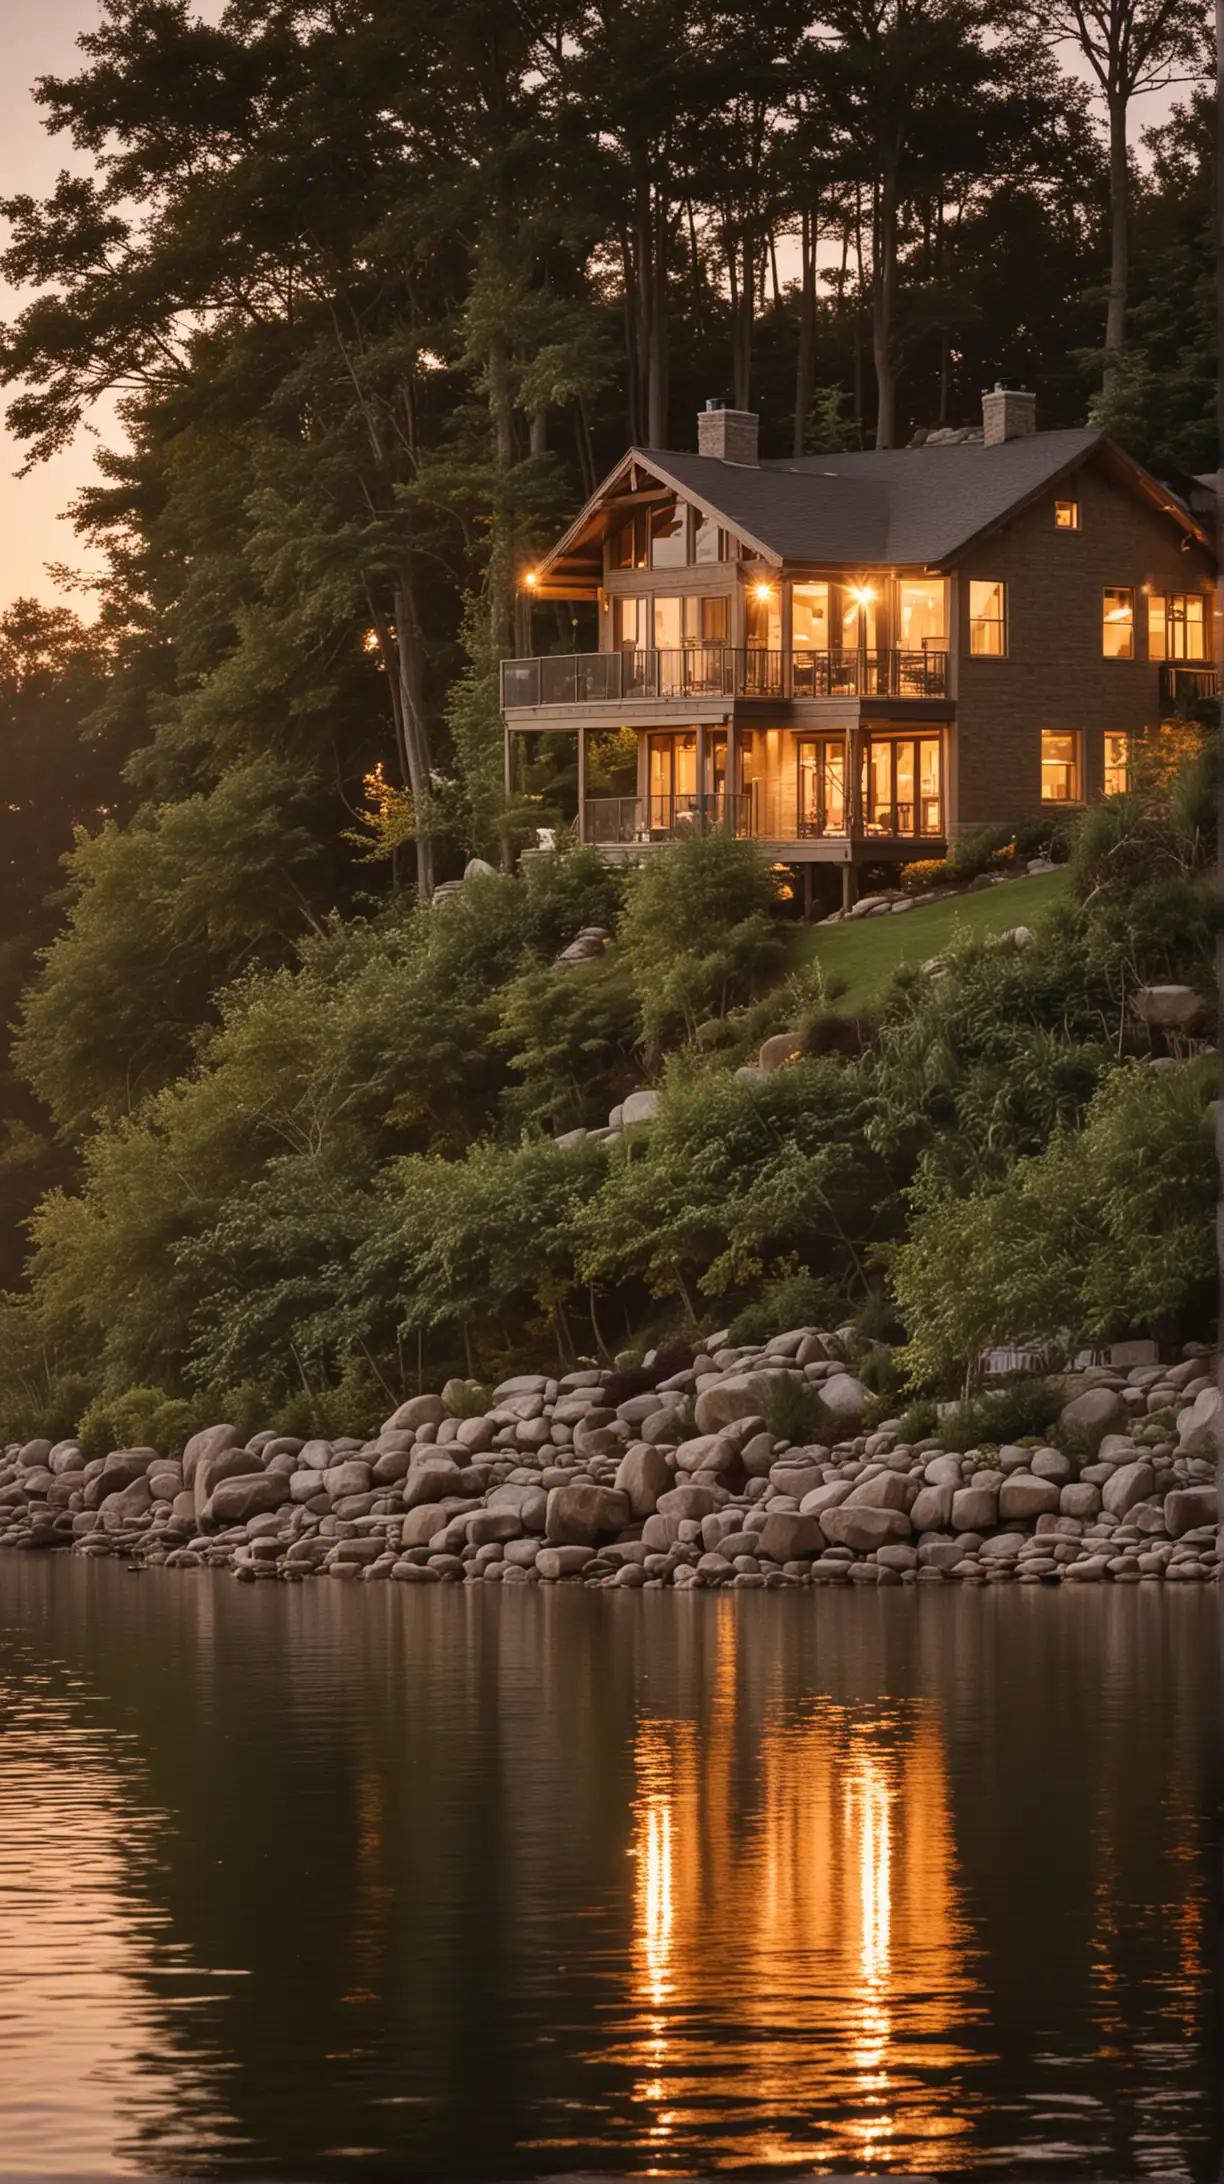 lakefront home at dawn, warm lighting